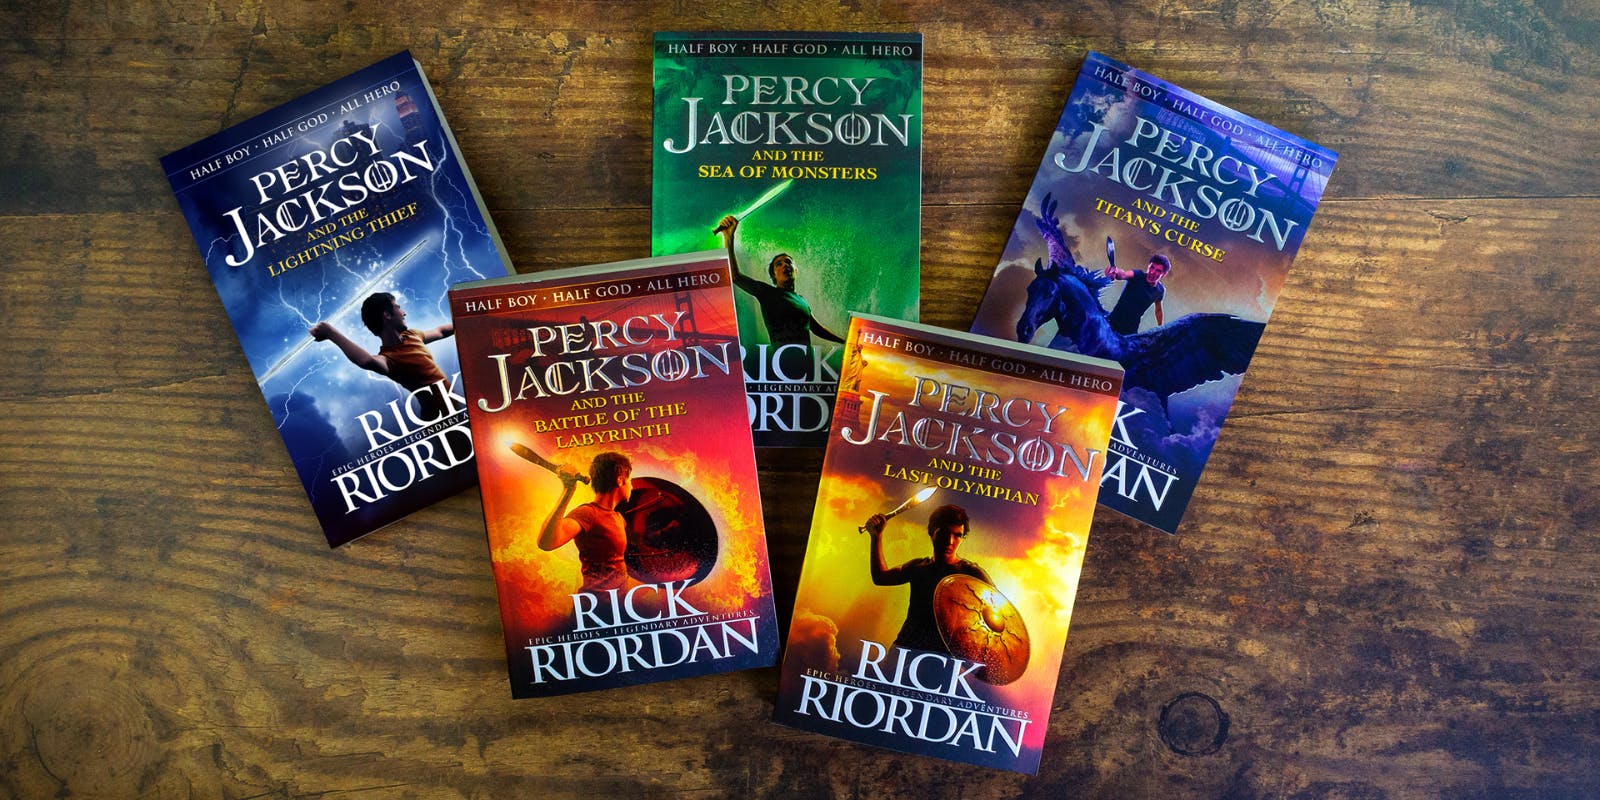 How to Make a Demigod: A Percy Jackson Guide - Main Locations and